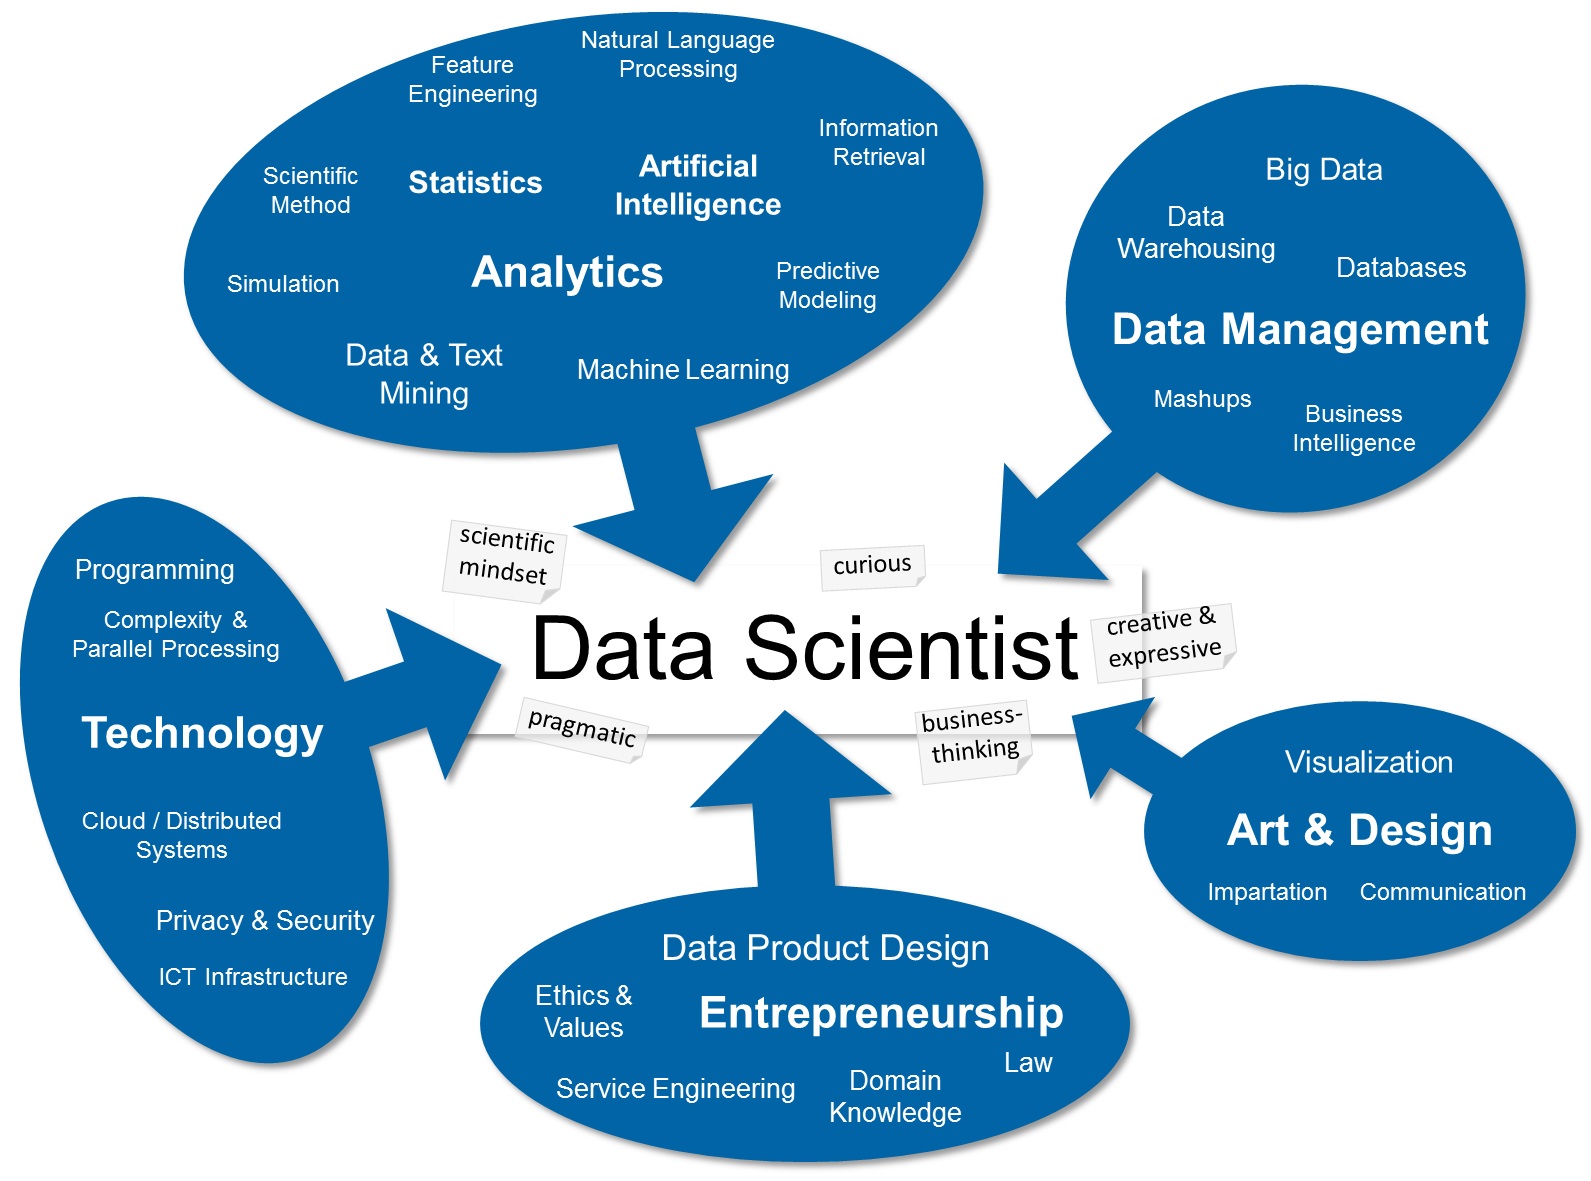 The data science skill set map